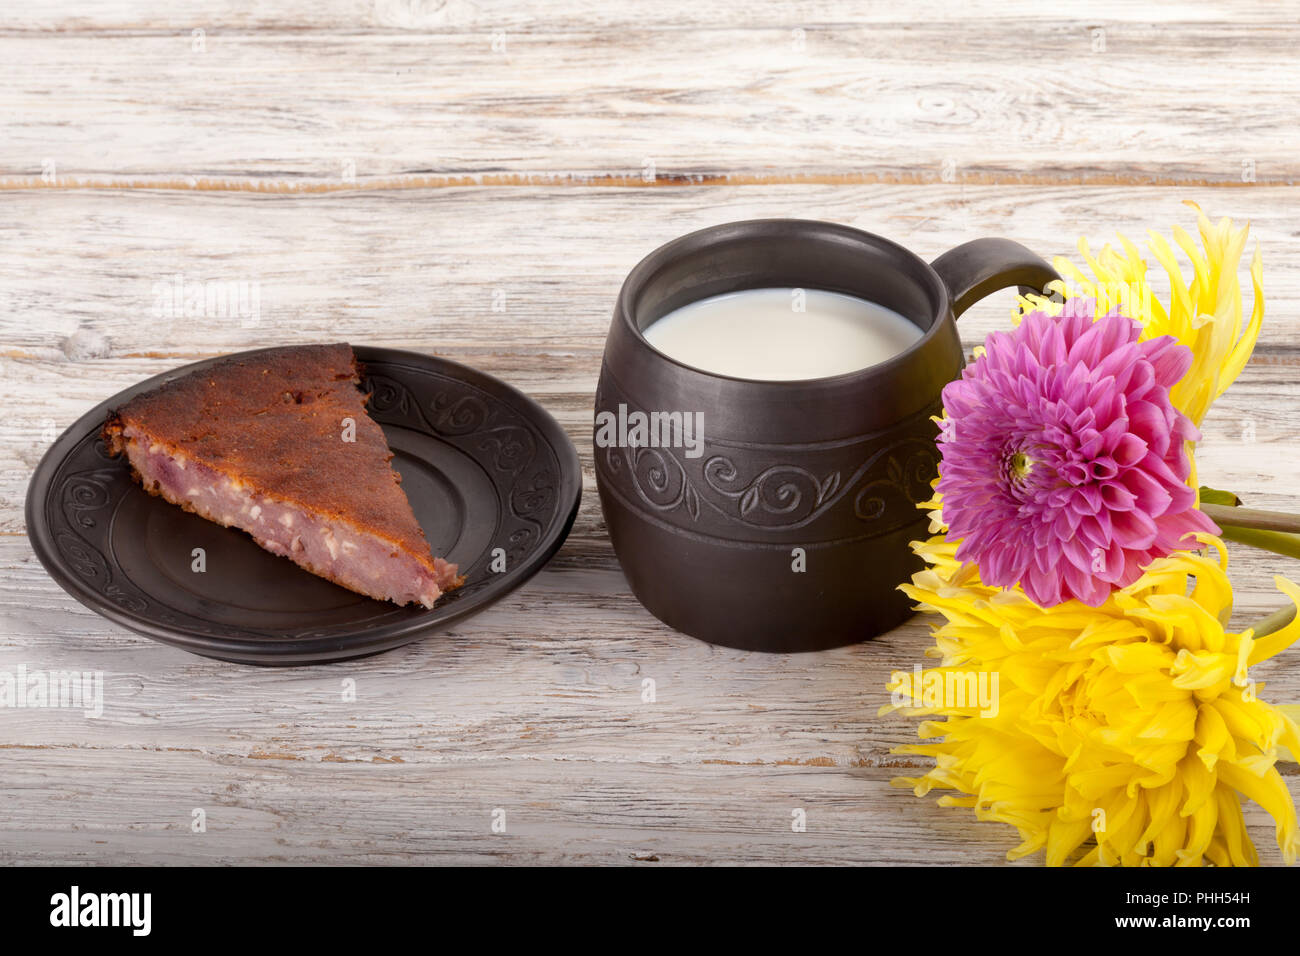 Ceramics handmade mug with milk, flowers and pie on wooden table Stock Photo